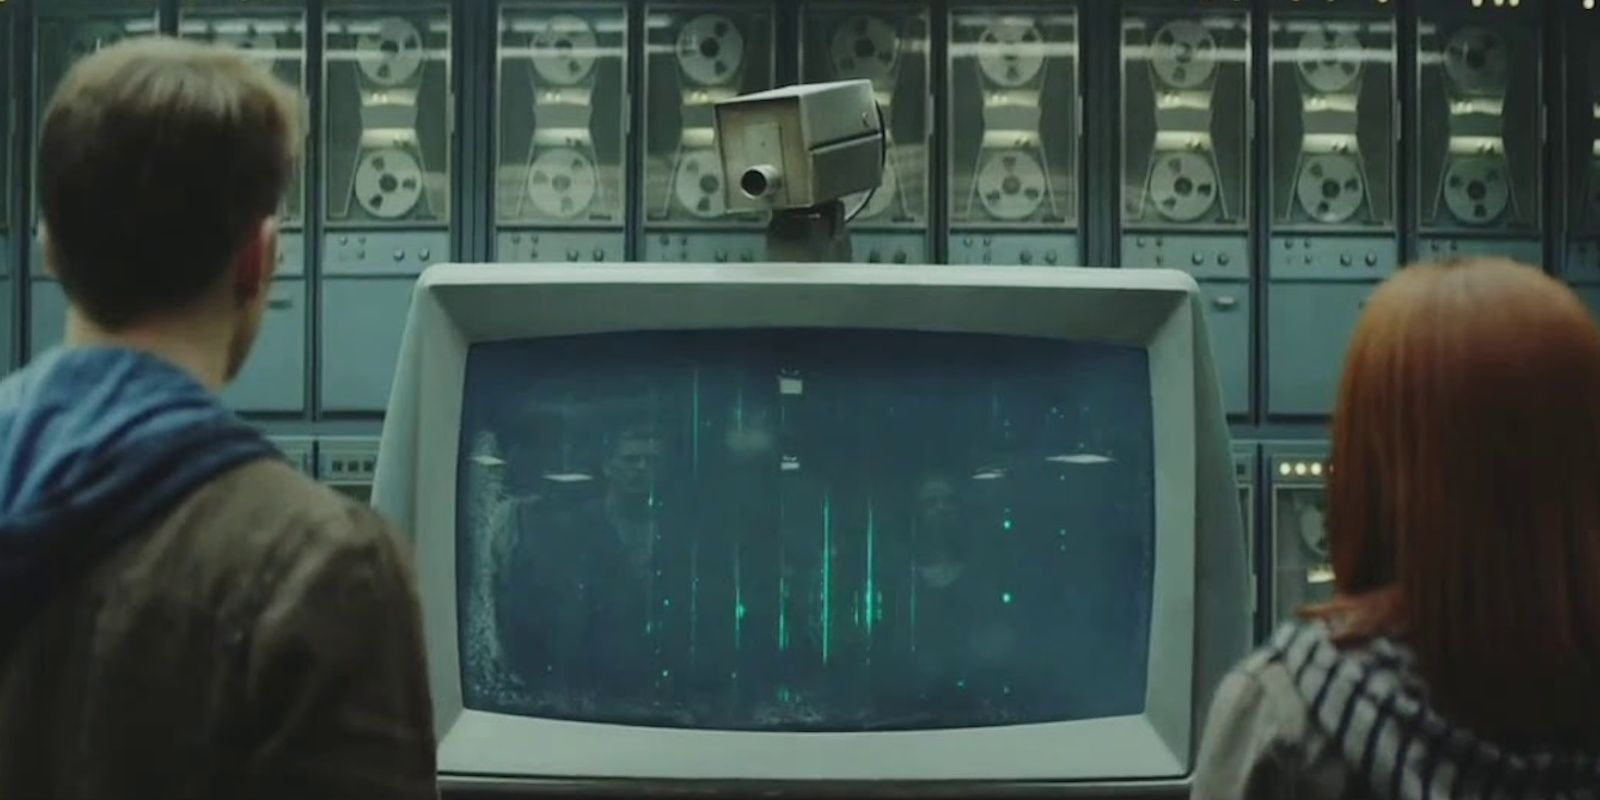 Steve Rogers and Natasha Romanoff looks at a Hydra computer in Captain America: The Winter Soldier